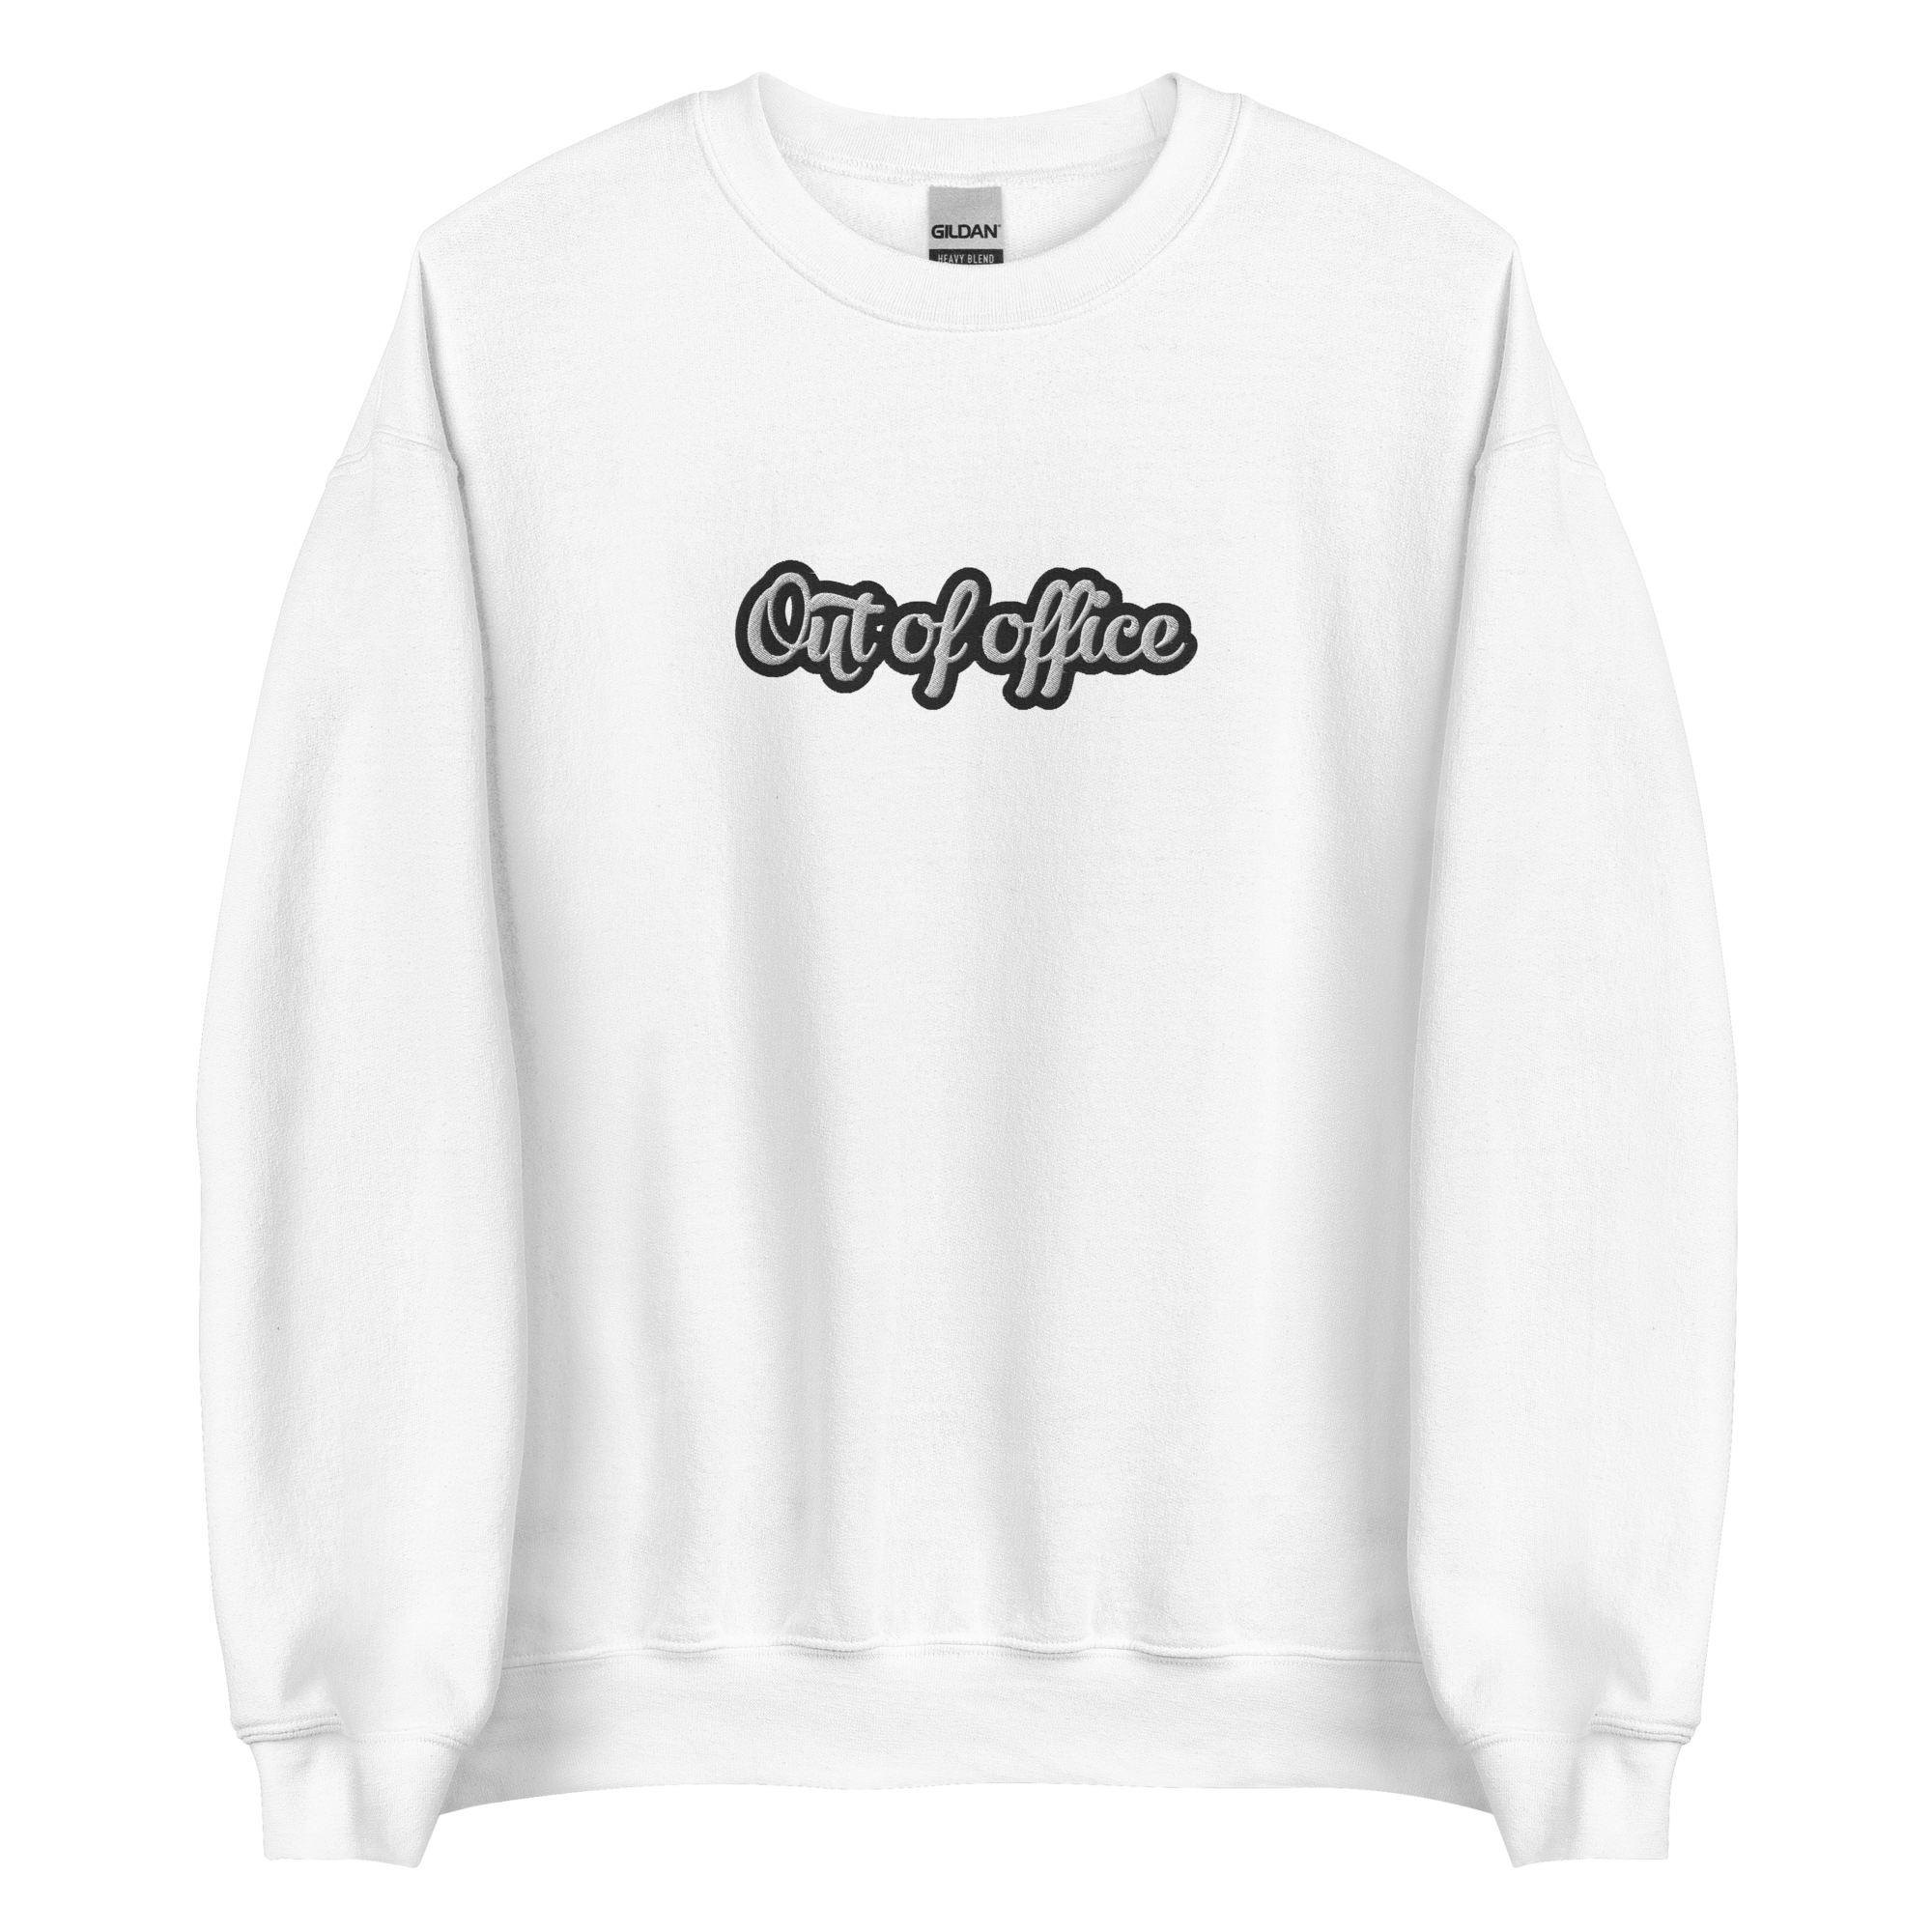 Out of Office *Embroidered* Sweatshirt